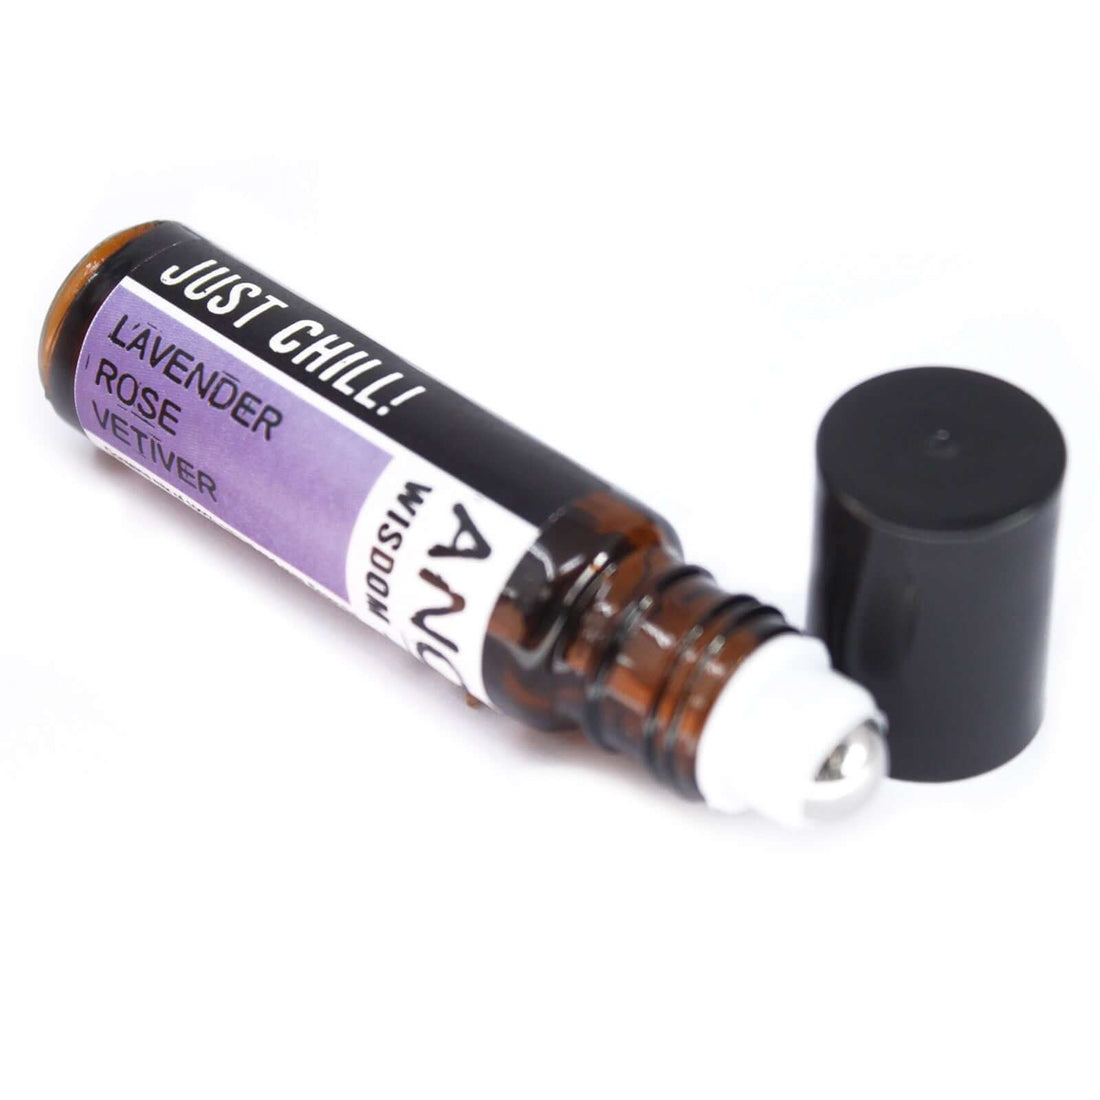 Roll on Essential Oil Blend - Just Chill!